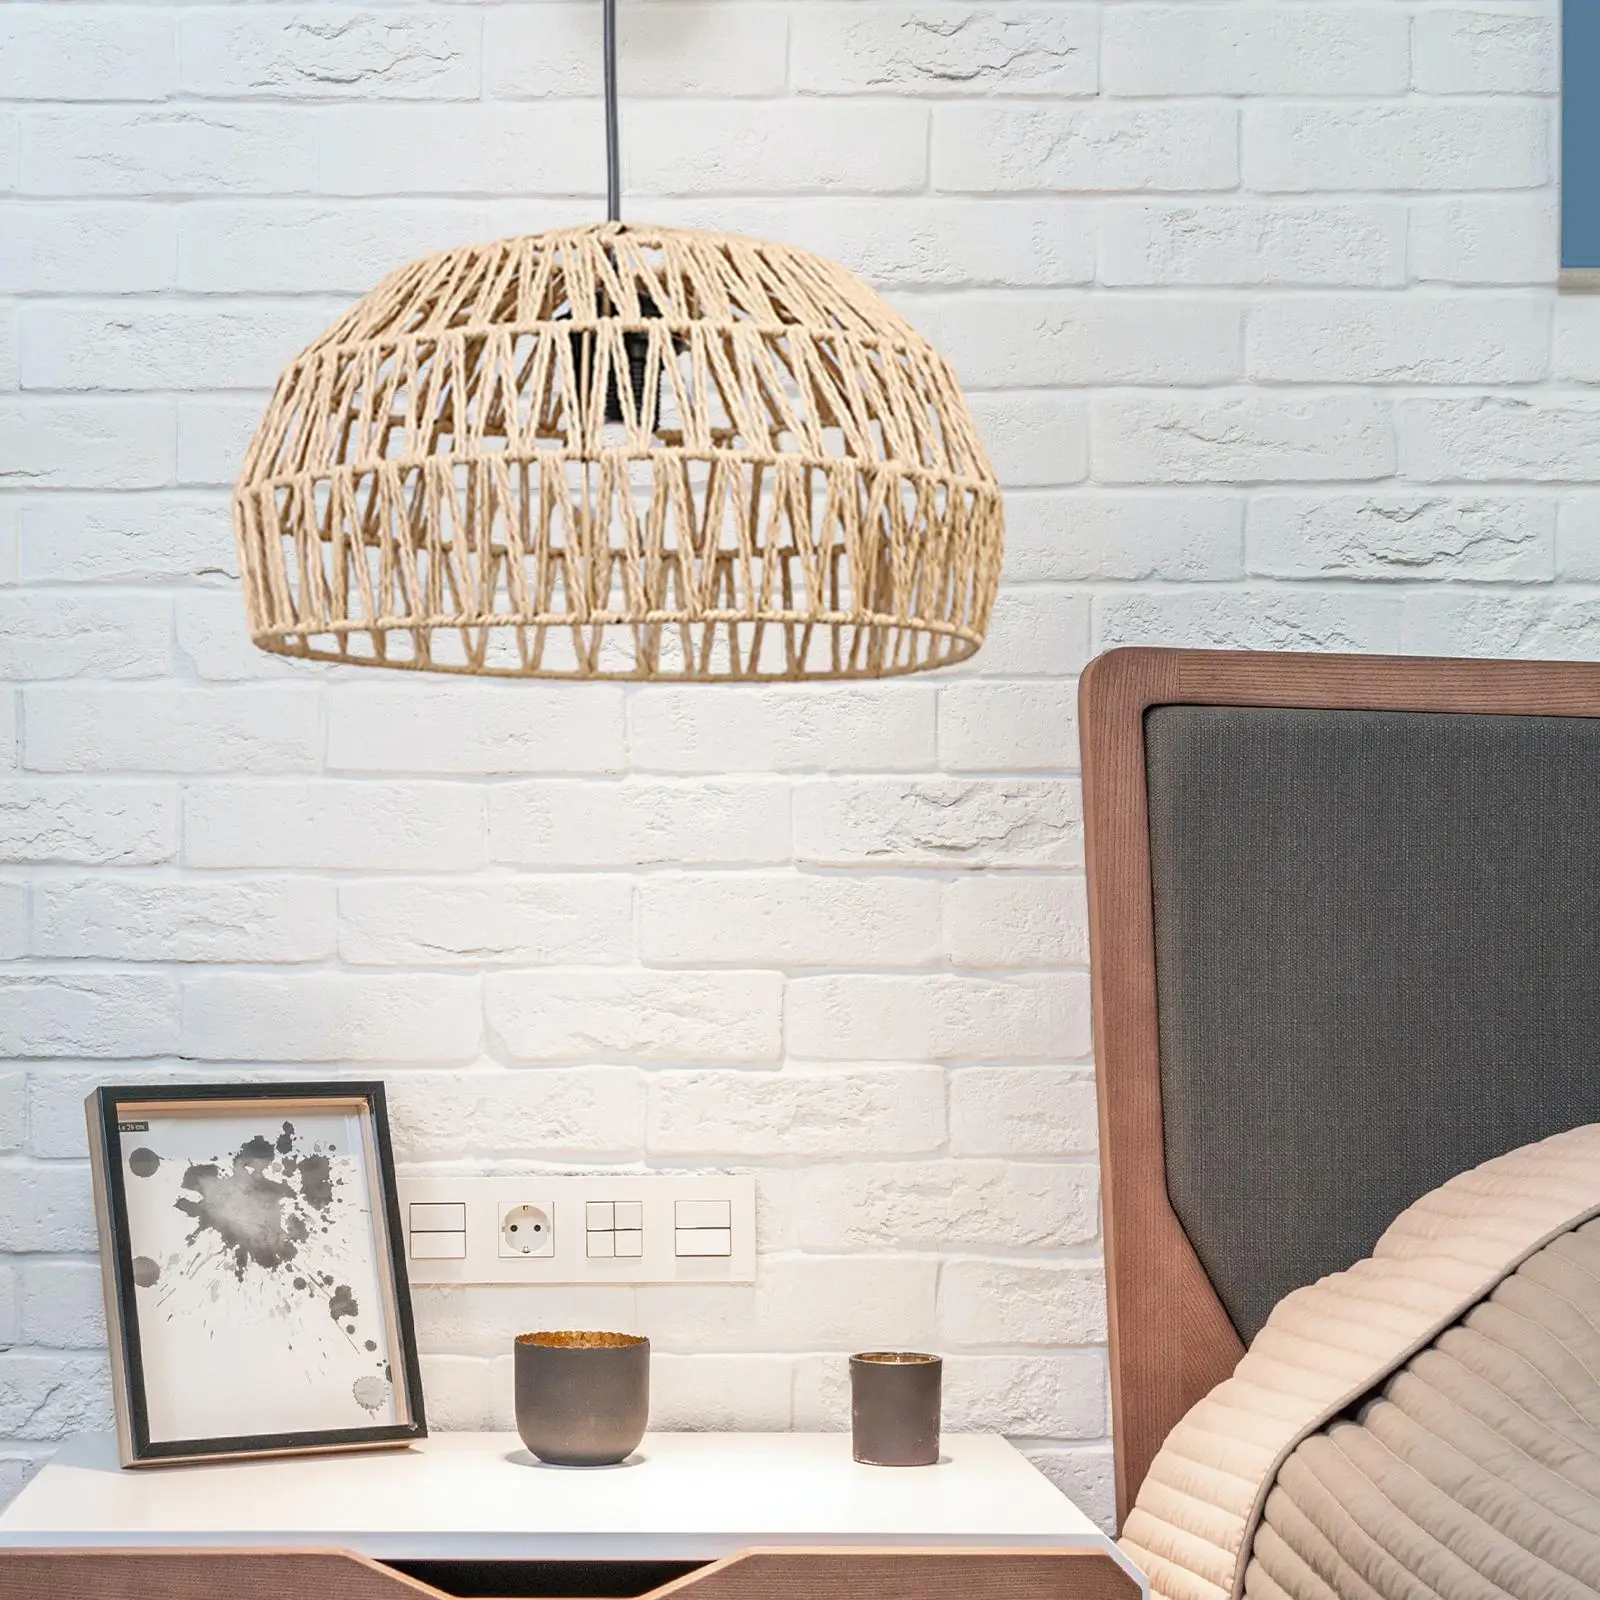 Pendant Lamp Shade Chandelier Ceiling Light Shade Paper Rope Woven Lampshade Lamp Cover Bulb Guard for Dining Room Decoration